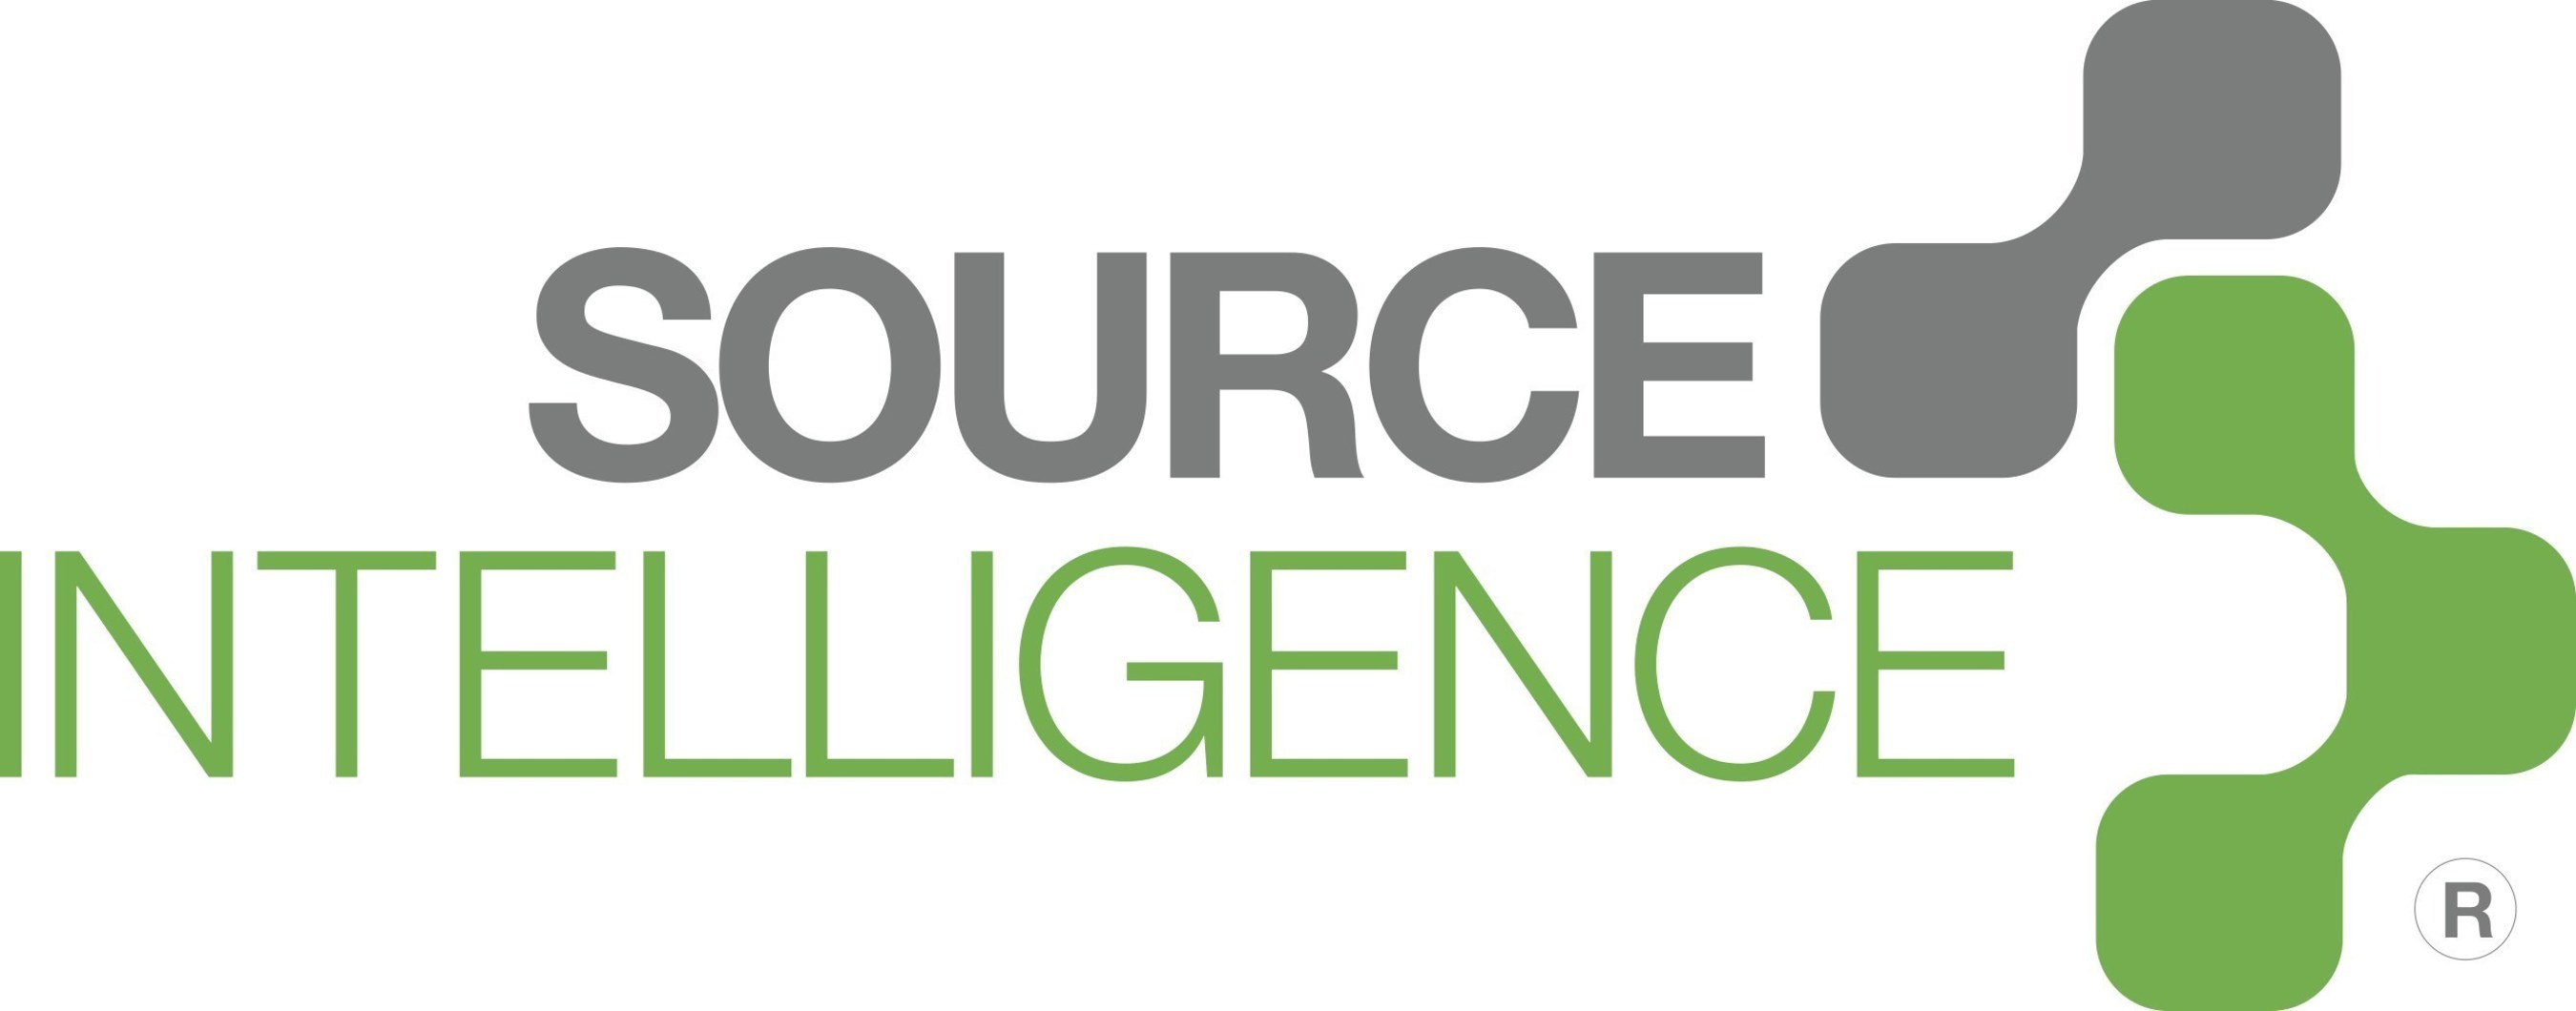 Source Intelligence(R) (SI) is a global network of businesses linked together to expedite the exchange and validation of compliance information. www.sourceintelligence.com